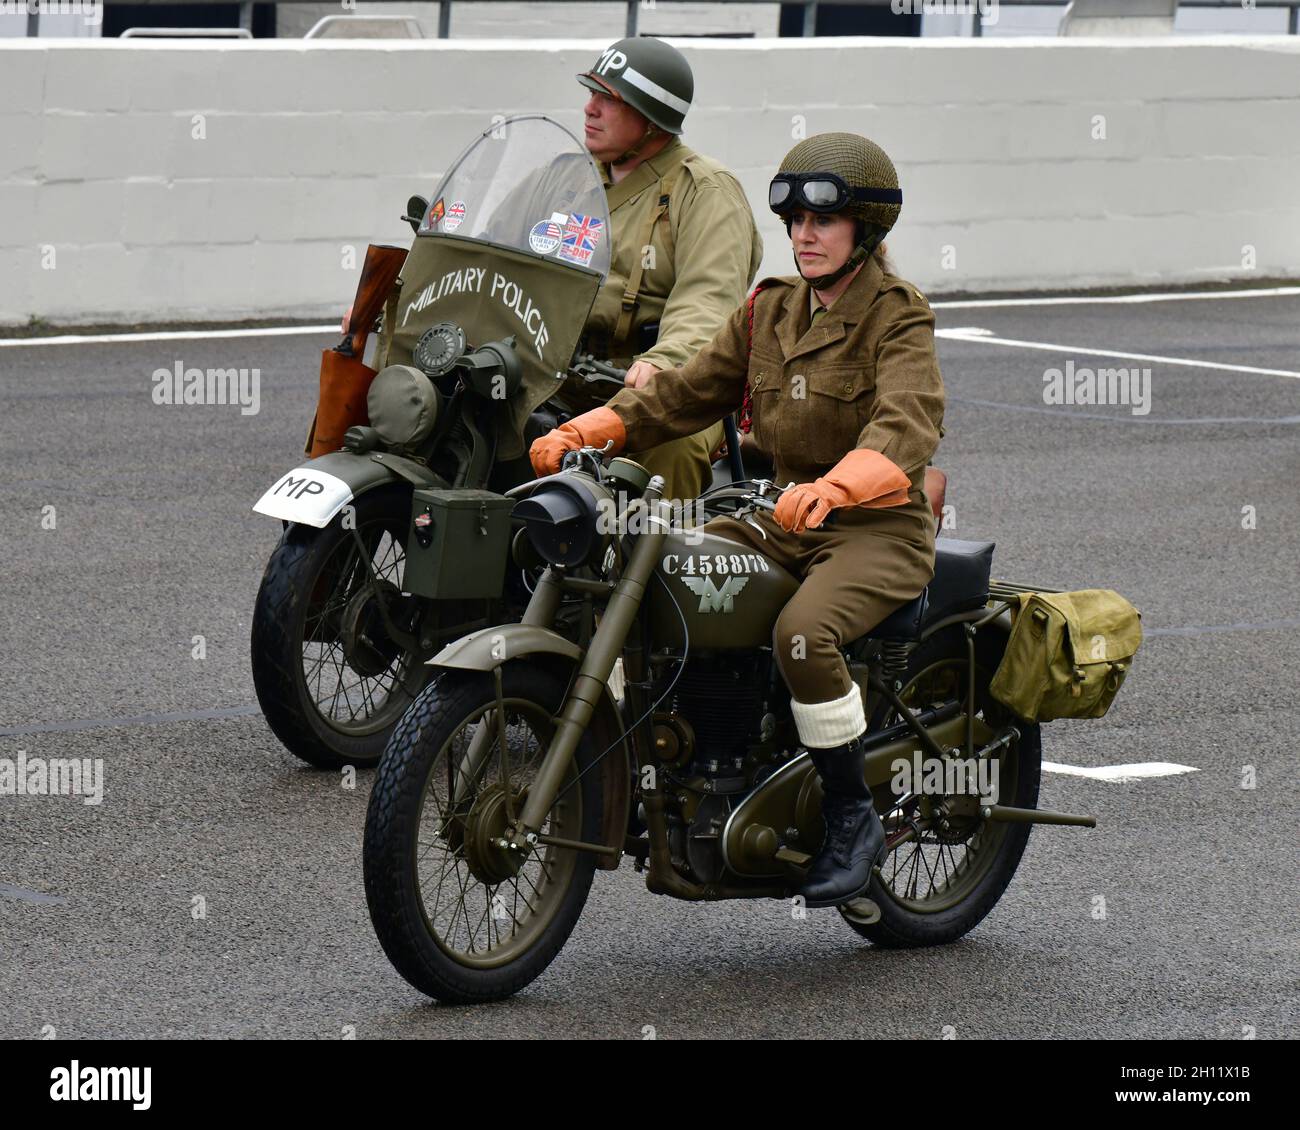 Harley Davidson WLA, Matchless, Victory Parade, Goodwood Revival 2021, Goodwood, Chichester, West Sussex, Inghilterra, settembre 2021. Foto Stock